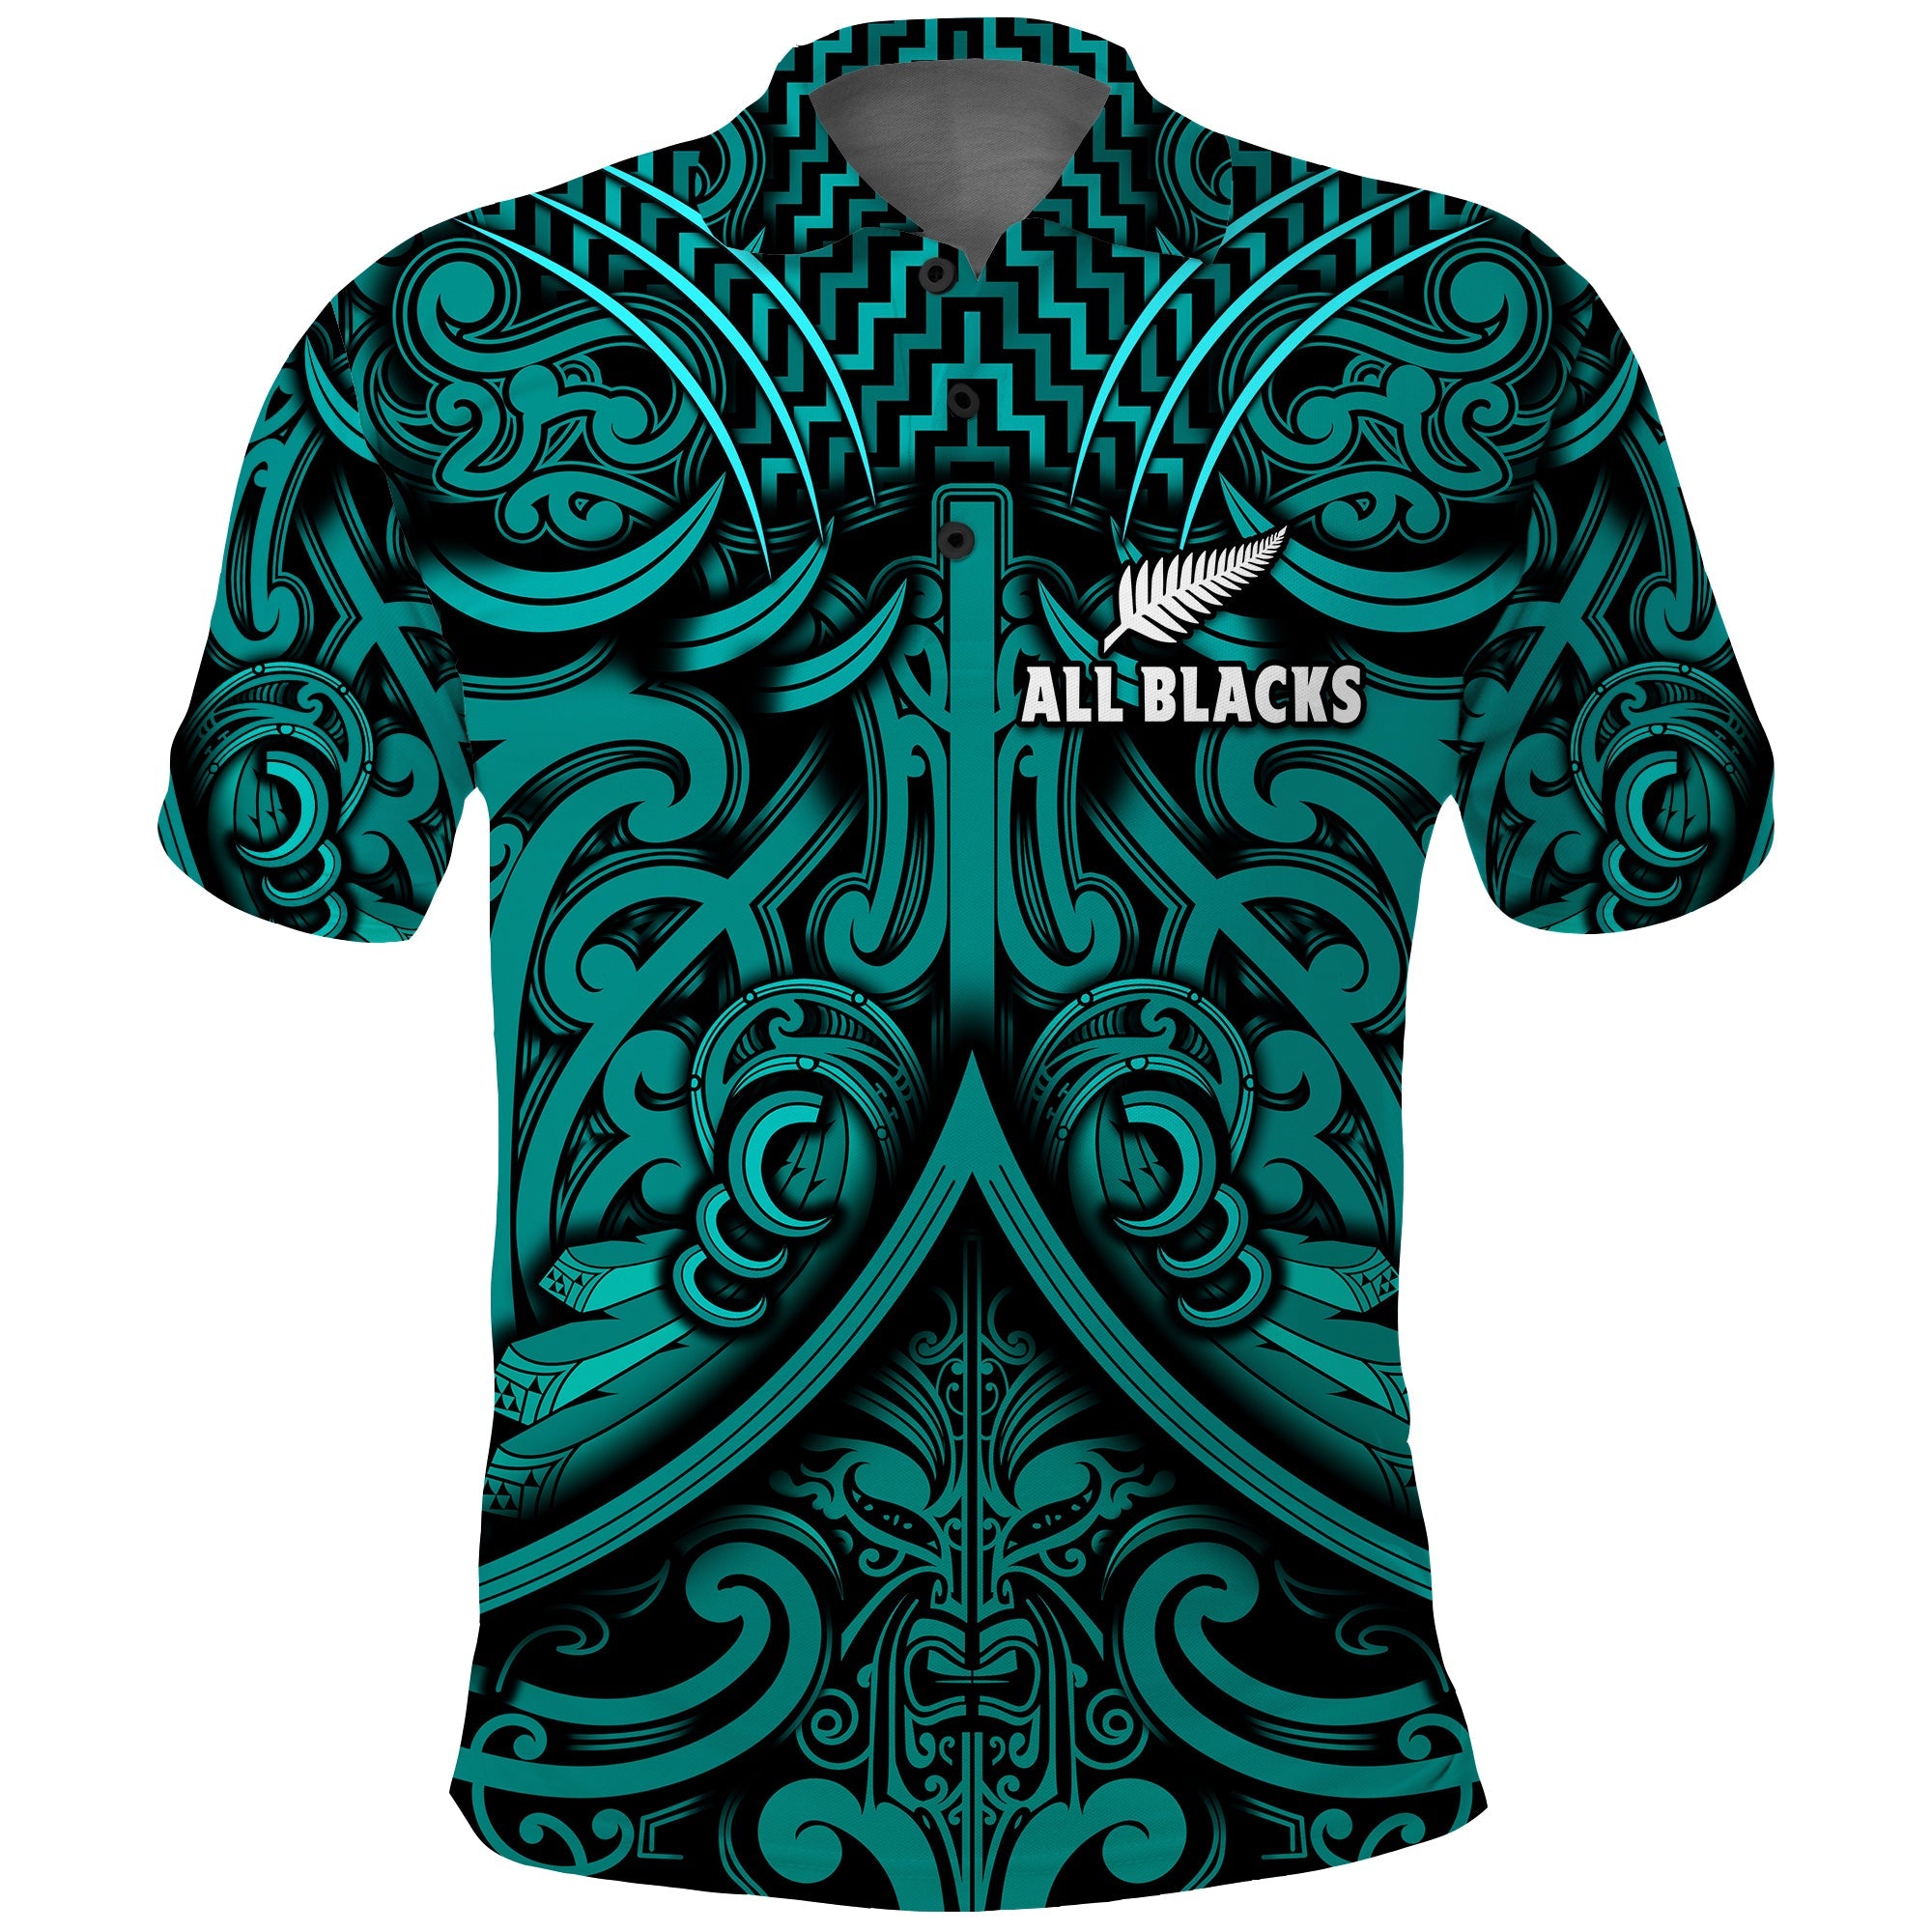 New Zealand Silver Fern Rugby Polo Shirt All Black Turquoise NZ Maori Pattern LT13 Turquoise - Polynesian Pride